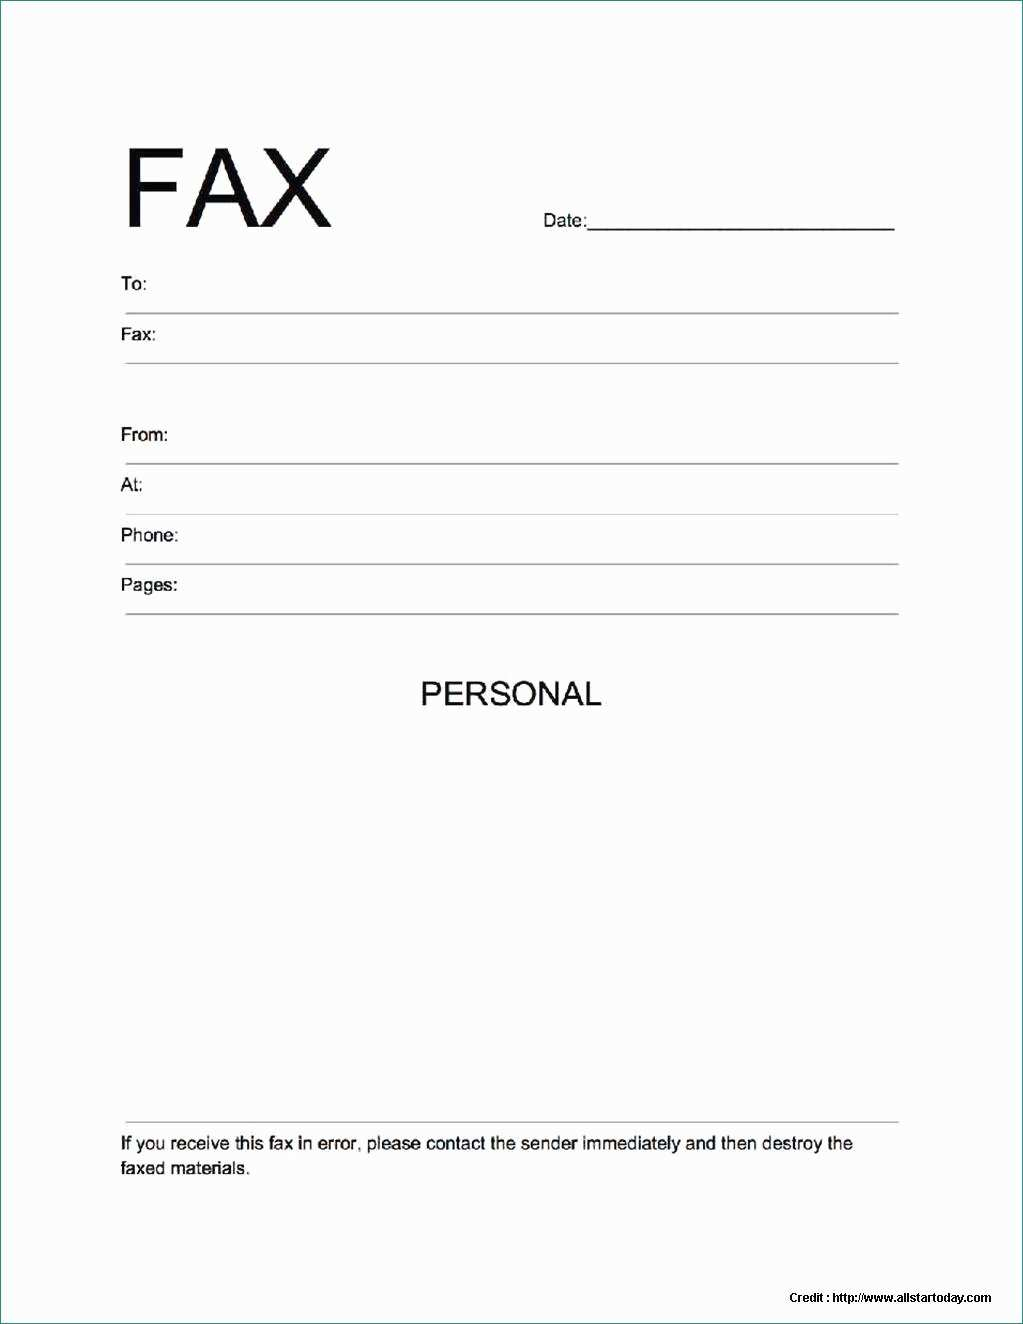 Free Printable Cover Letter Templates - Free Printable Cover Letter For Fax